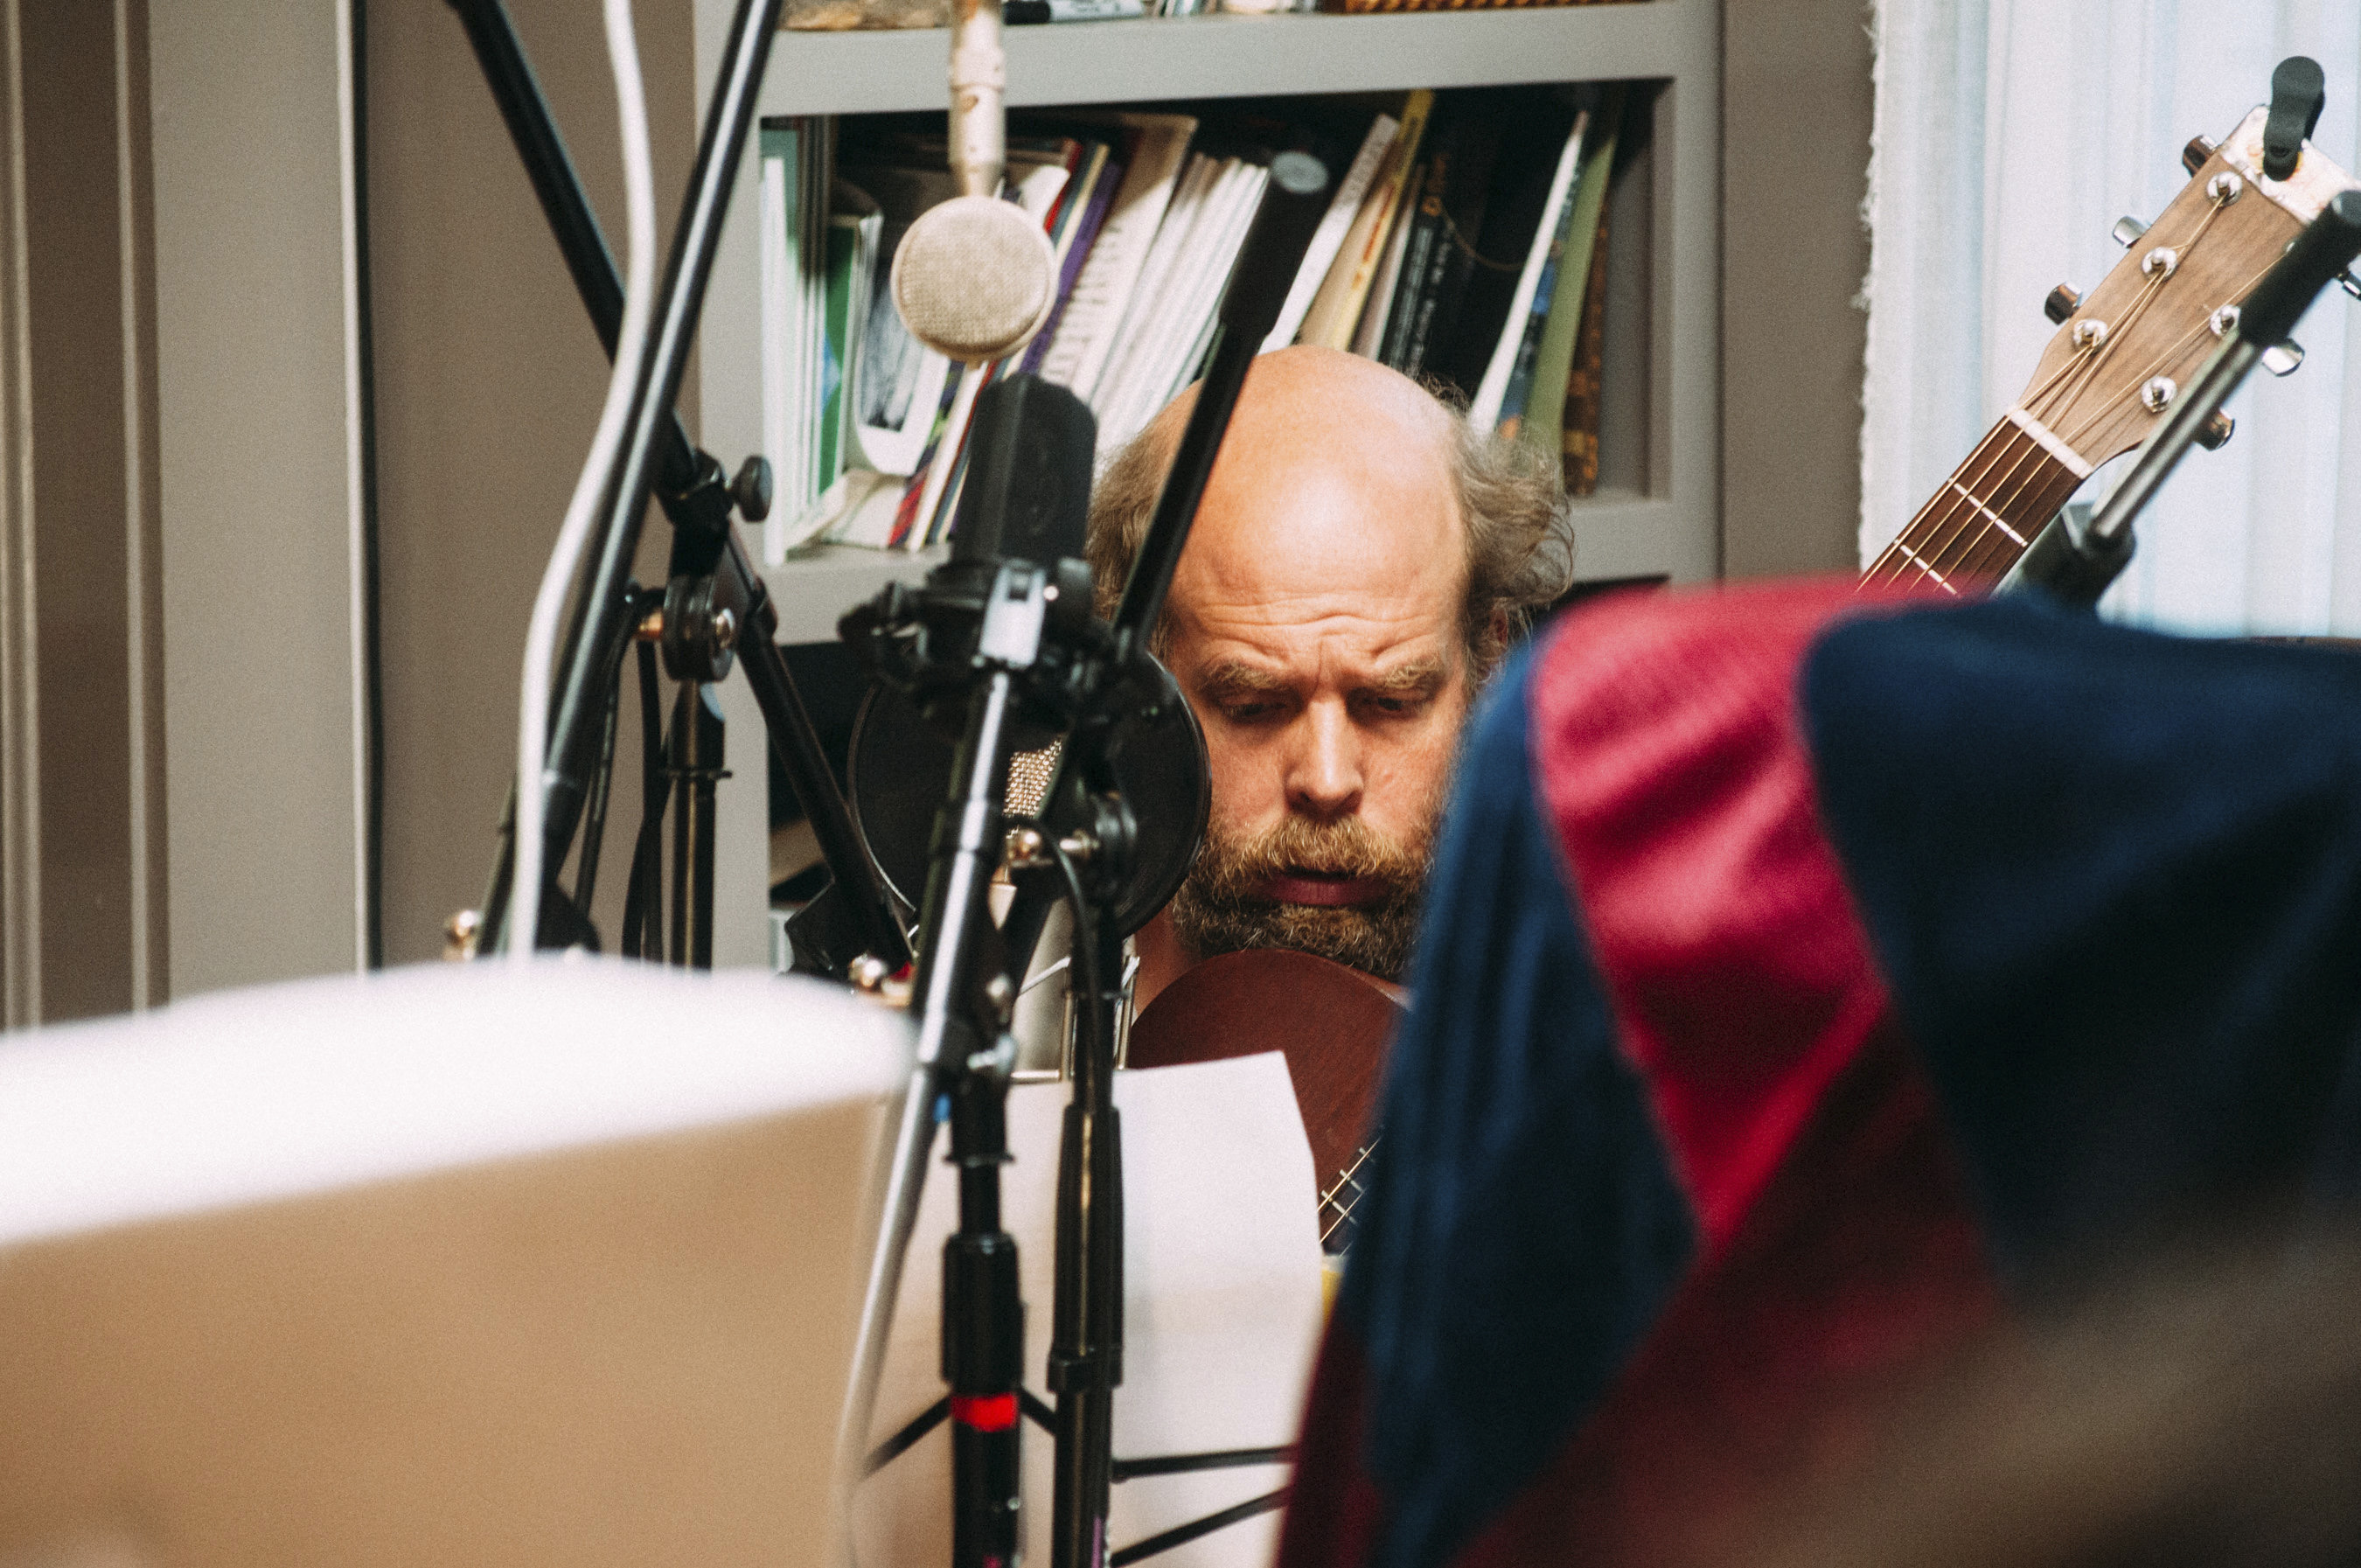 Bonnie ‘Prince’ Billy announces solo tour, fullband tour, and